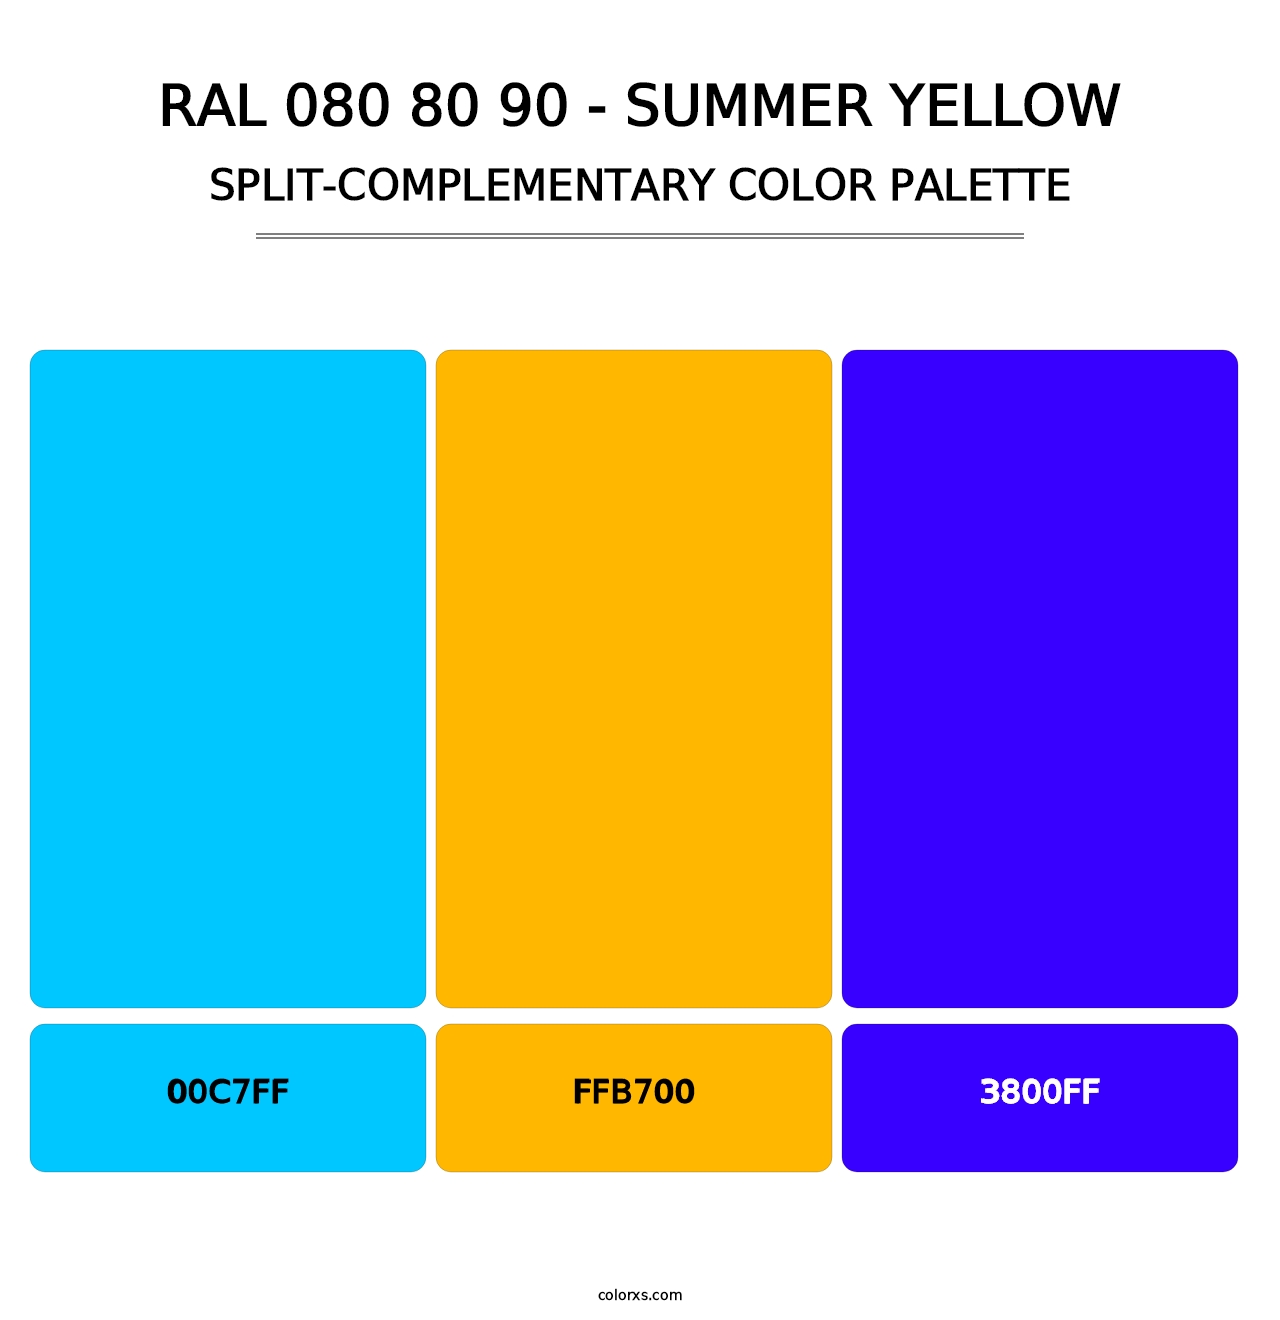 RAL 080 80 90 - Summer Yellow - Split-Complementary Color Palette